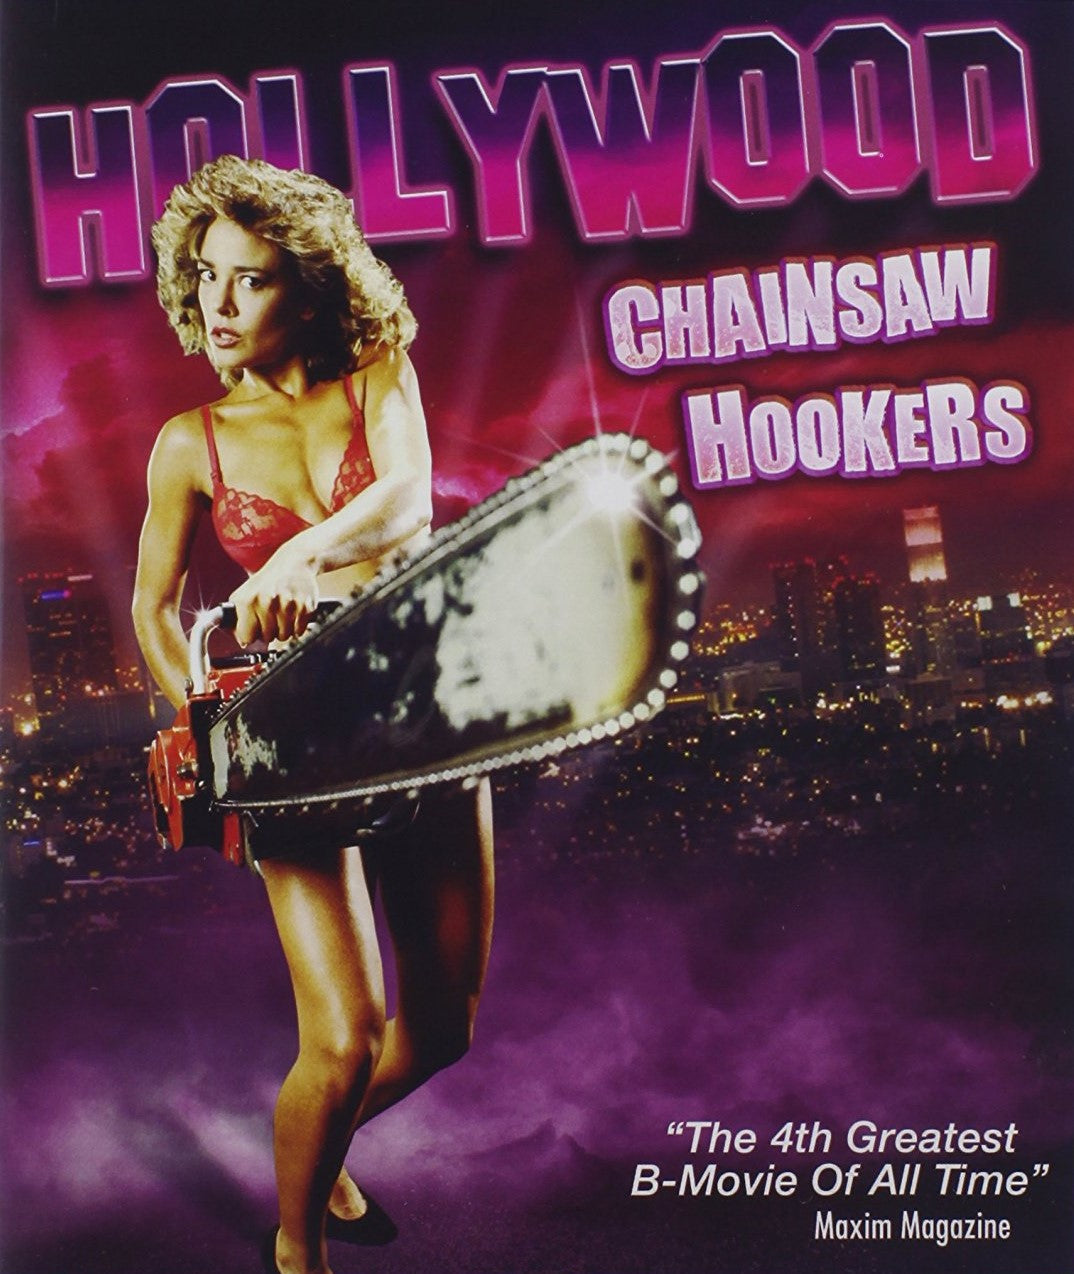 Hollywood Chainsaw Hookers Blu-Ray Blu-Ray